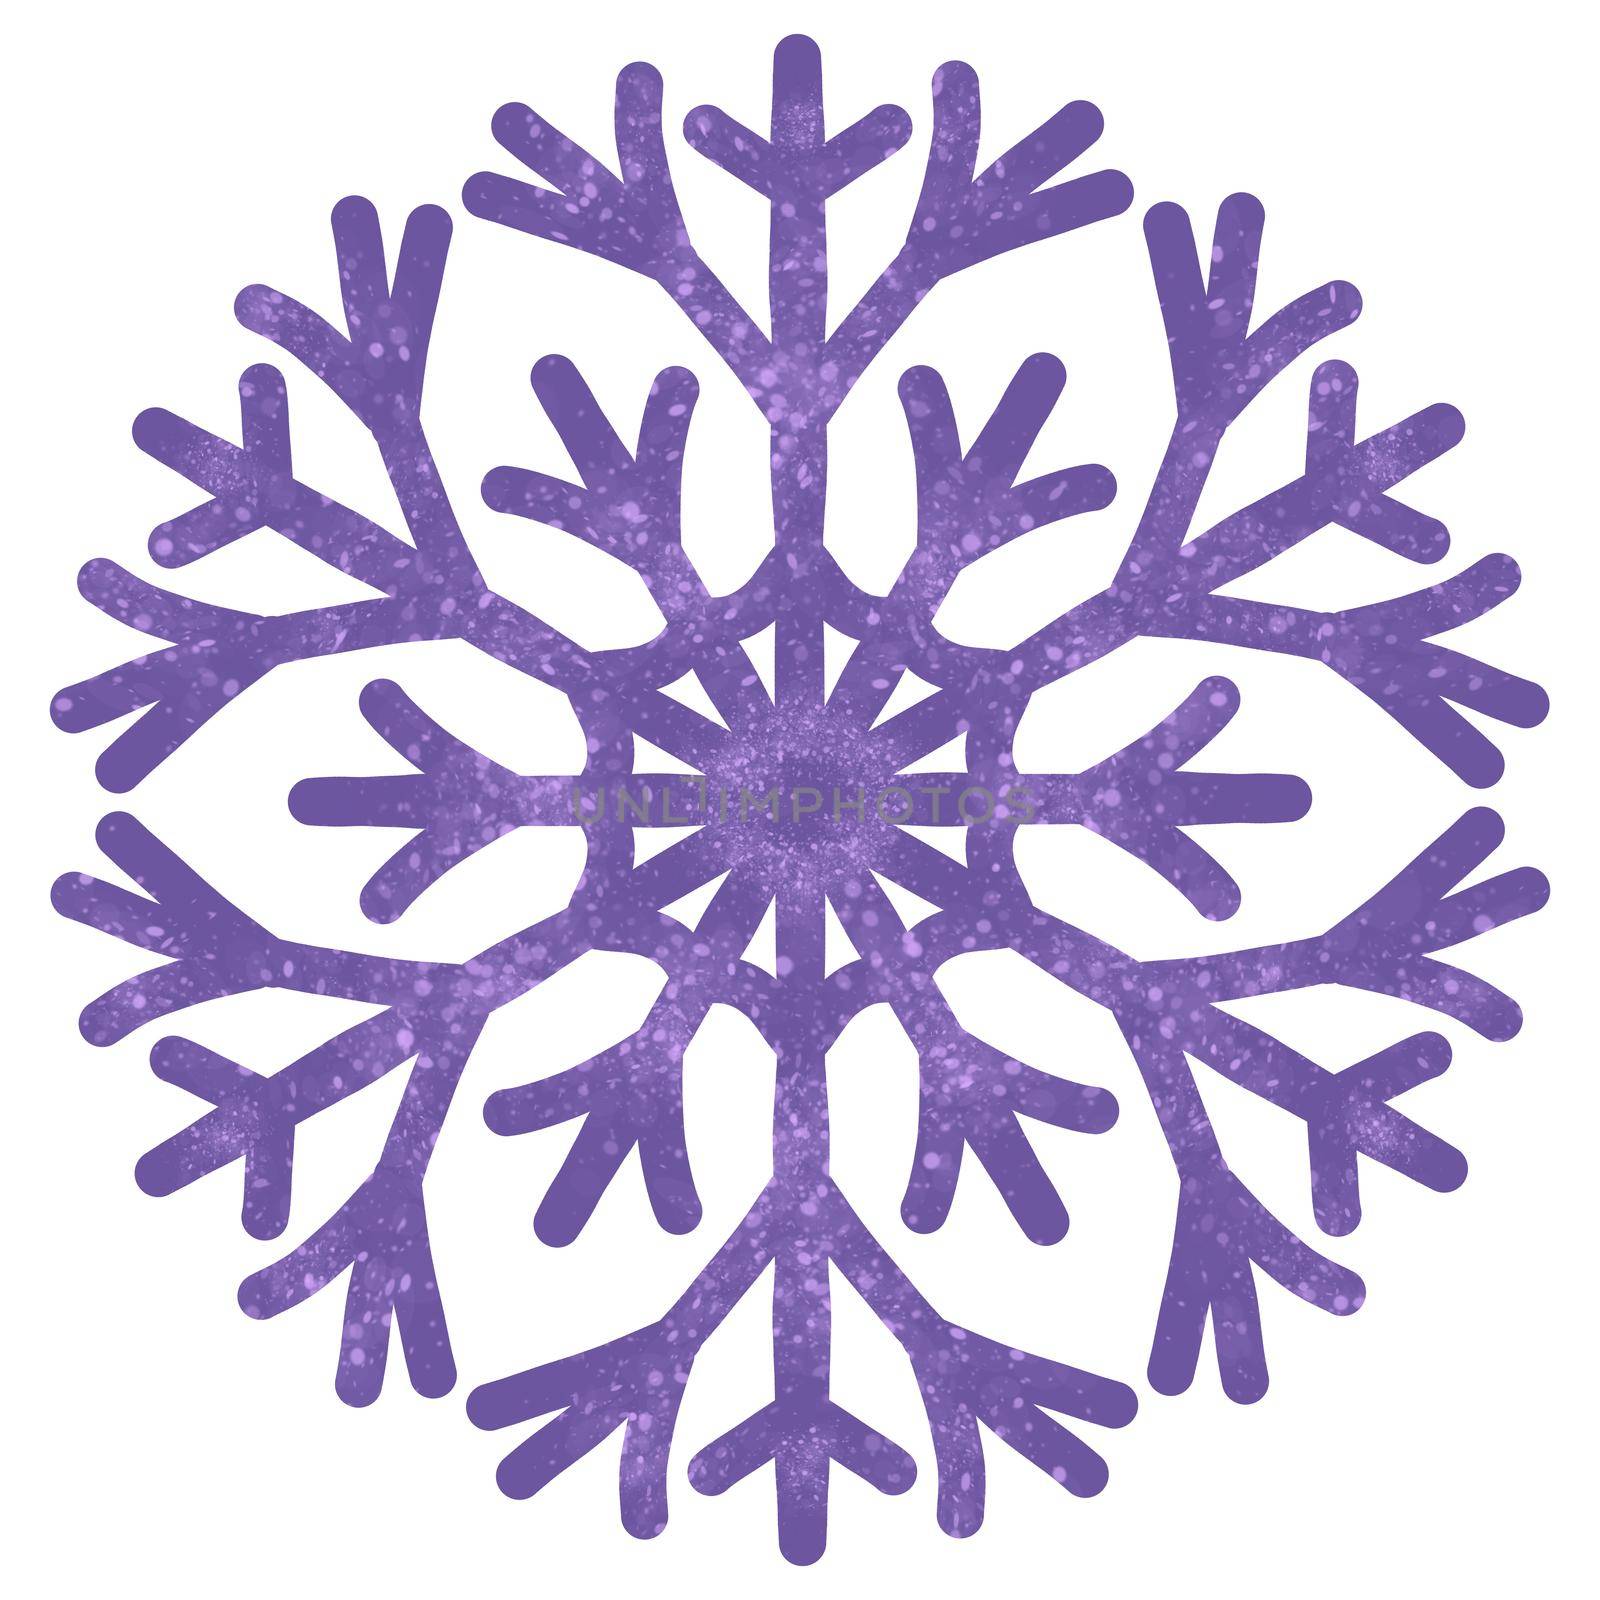 paint watercolor snowflakes illustration. Holiday traditional decoration, sign of winter, cold weather, symbol of unique beauty. Hand painted drawing, isolated on white background.